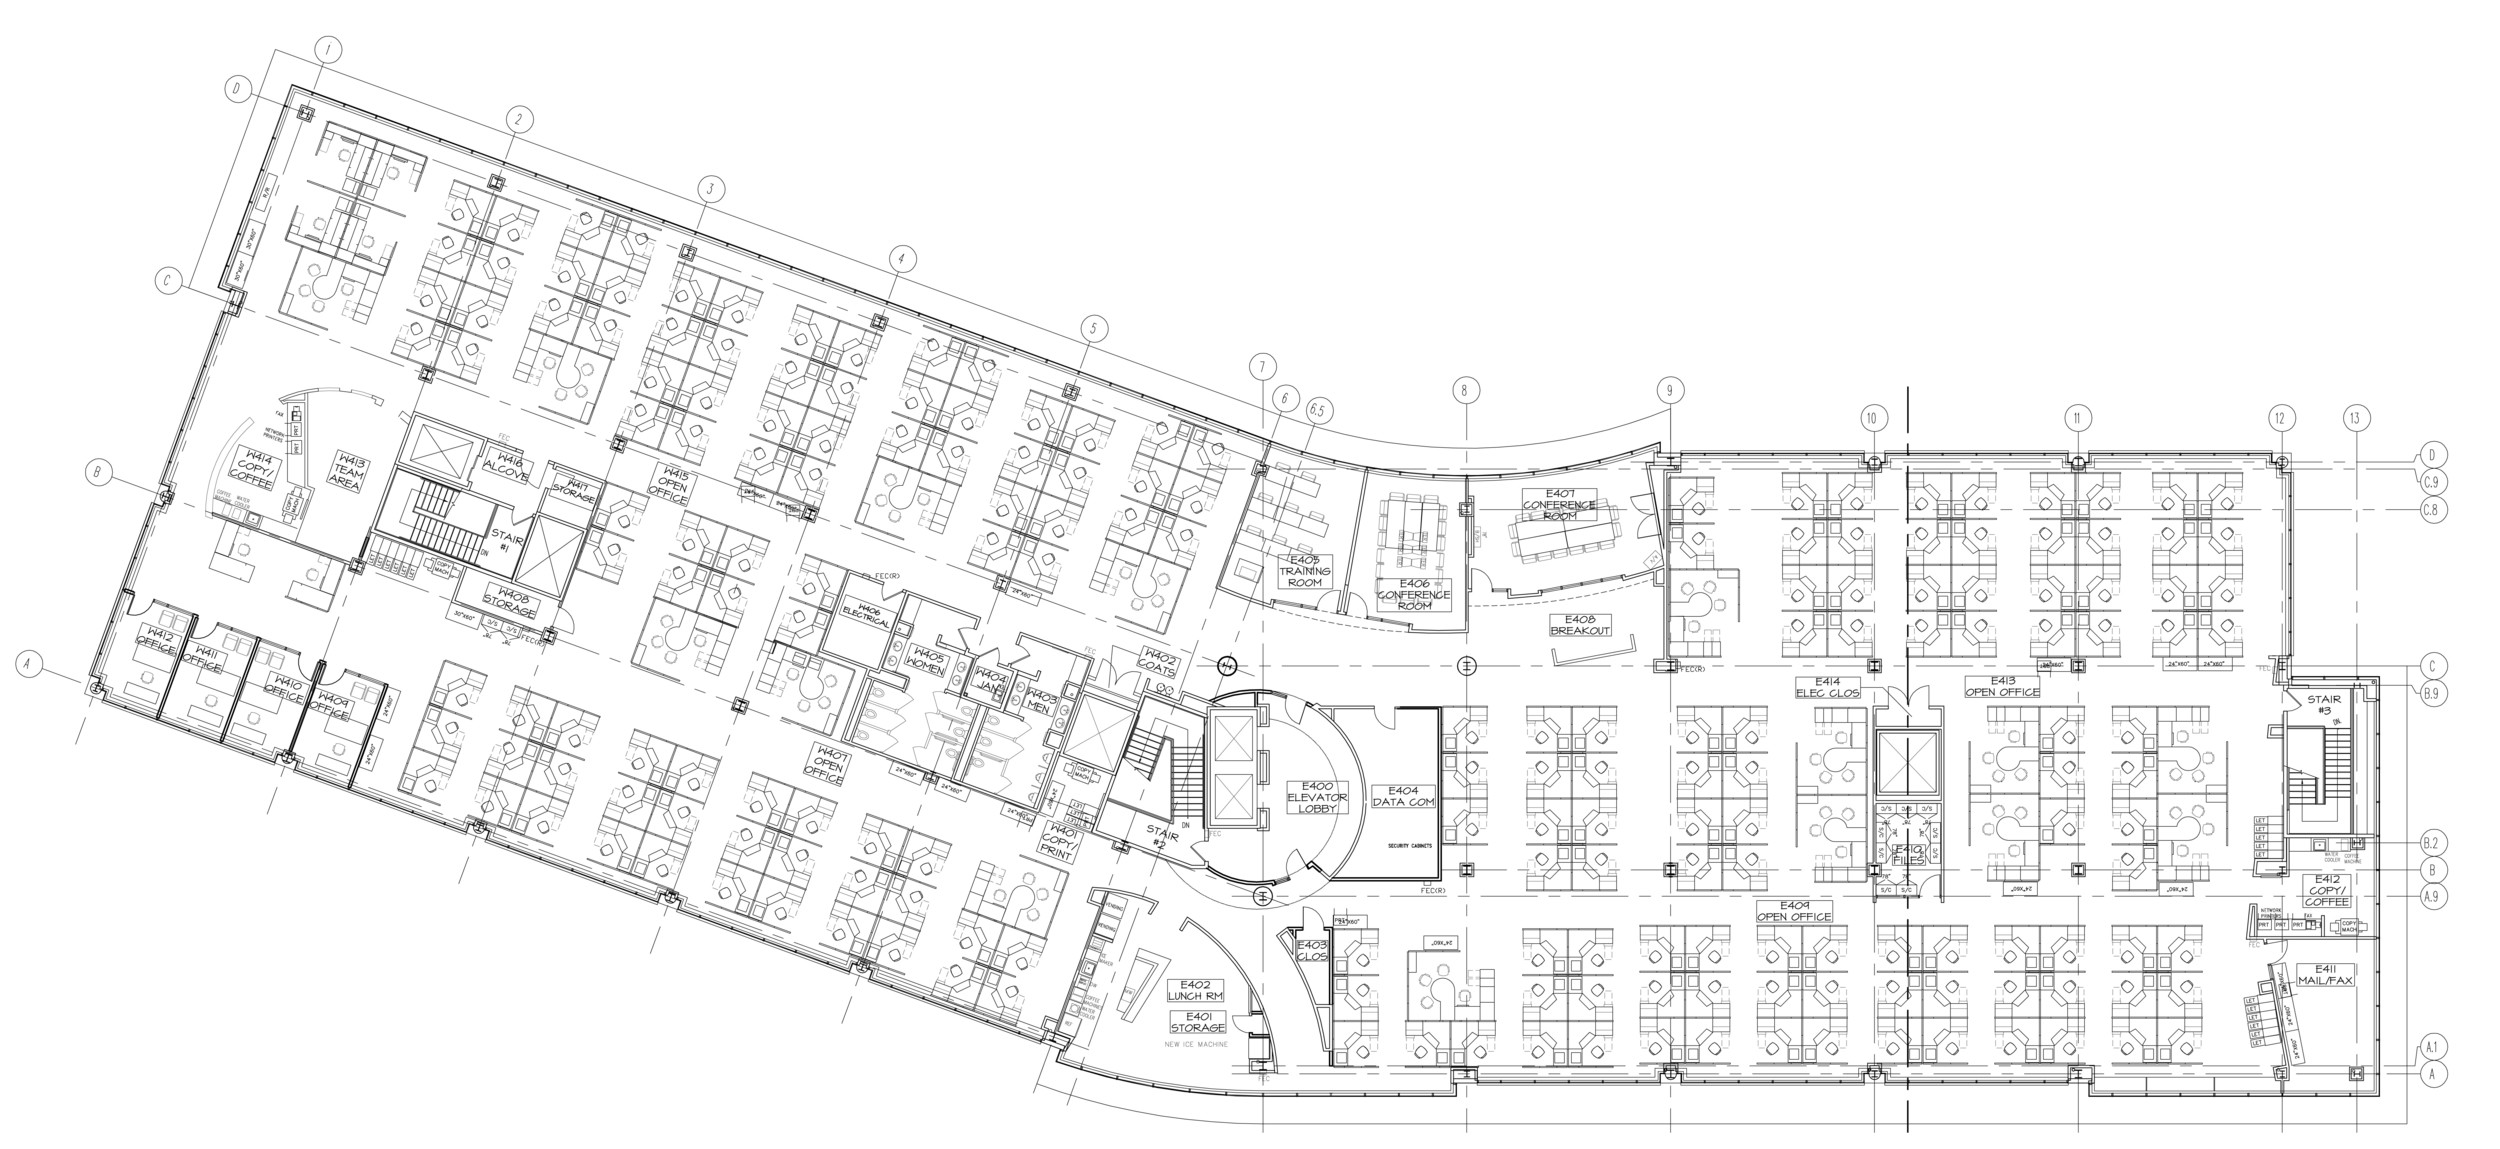 State Farm A1_1 overall_DWG A1_1 overall plans.jpg